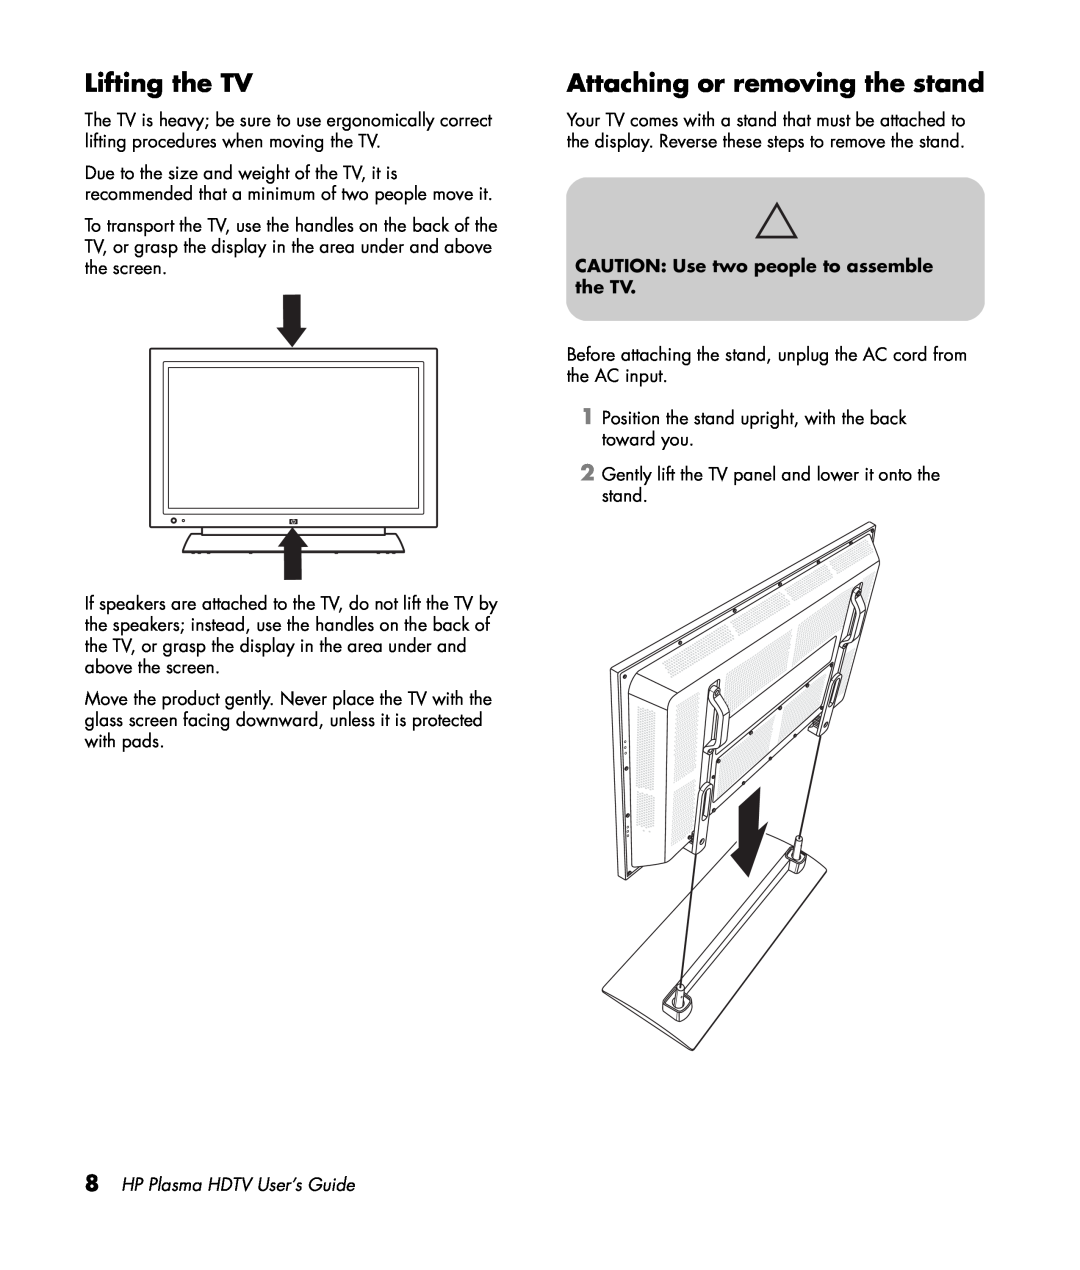 HP PL5060N 50 inch Plasma manual Lifting the TV, Attaching or removing the stand, CAUTION Use two people to assemble the TV 